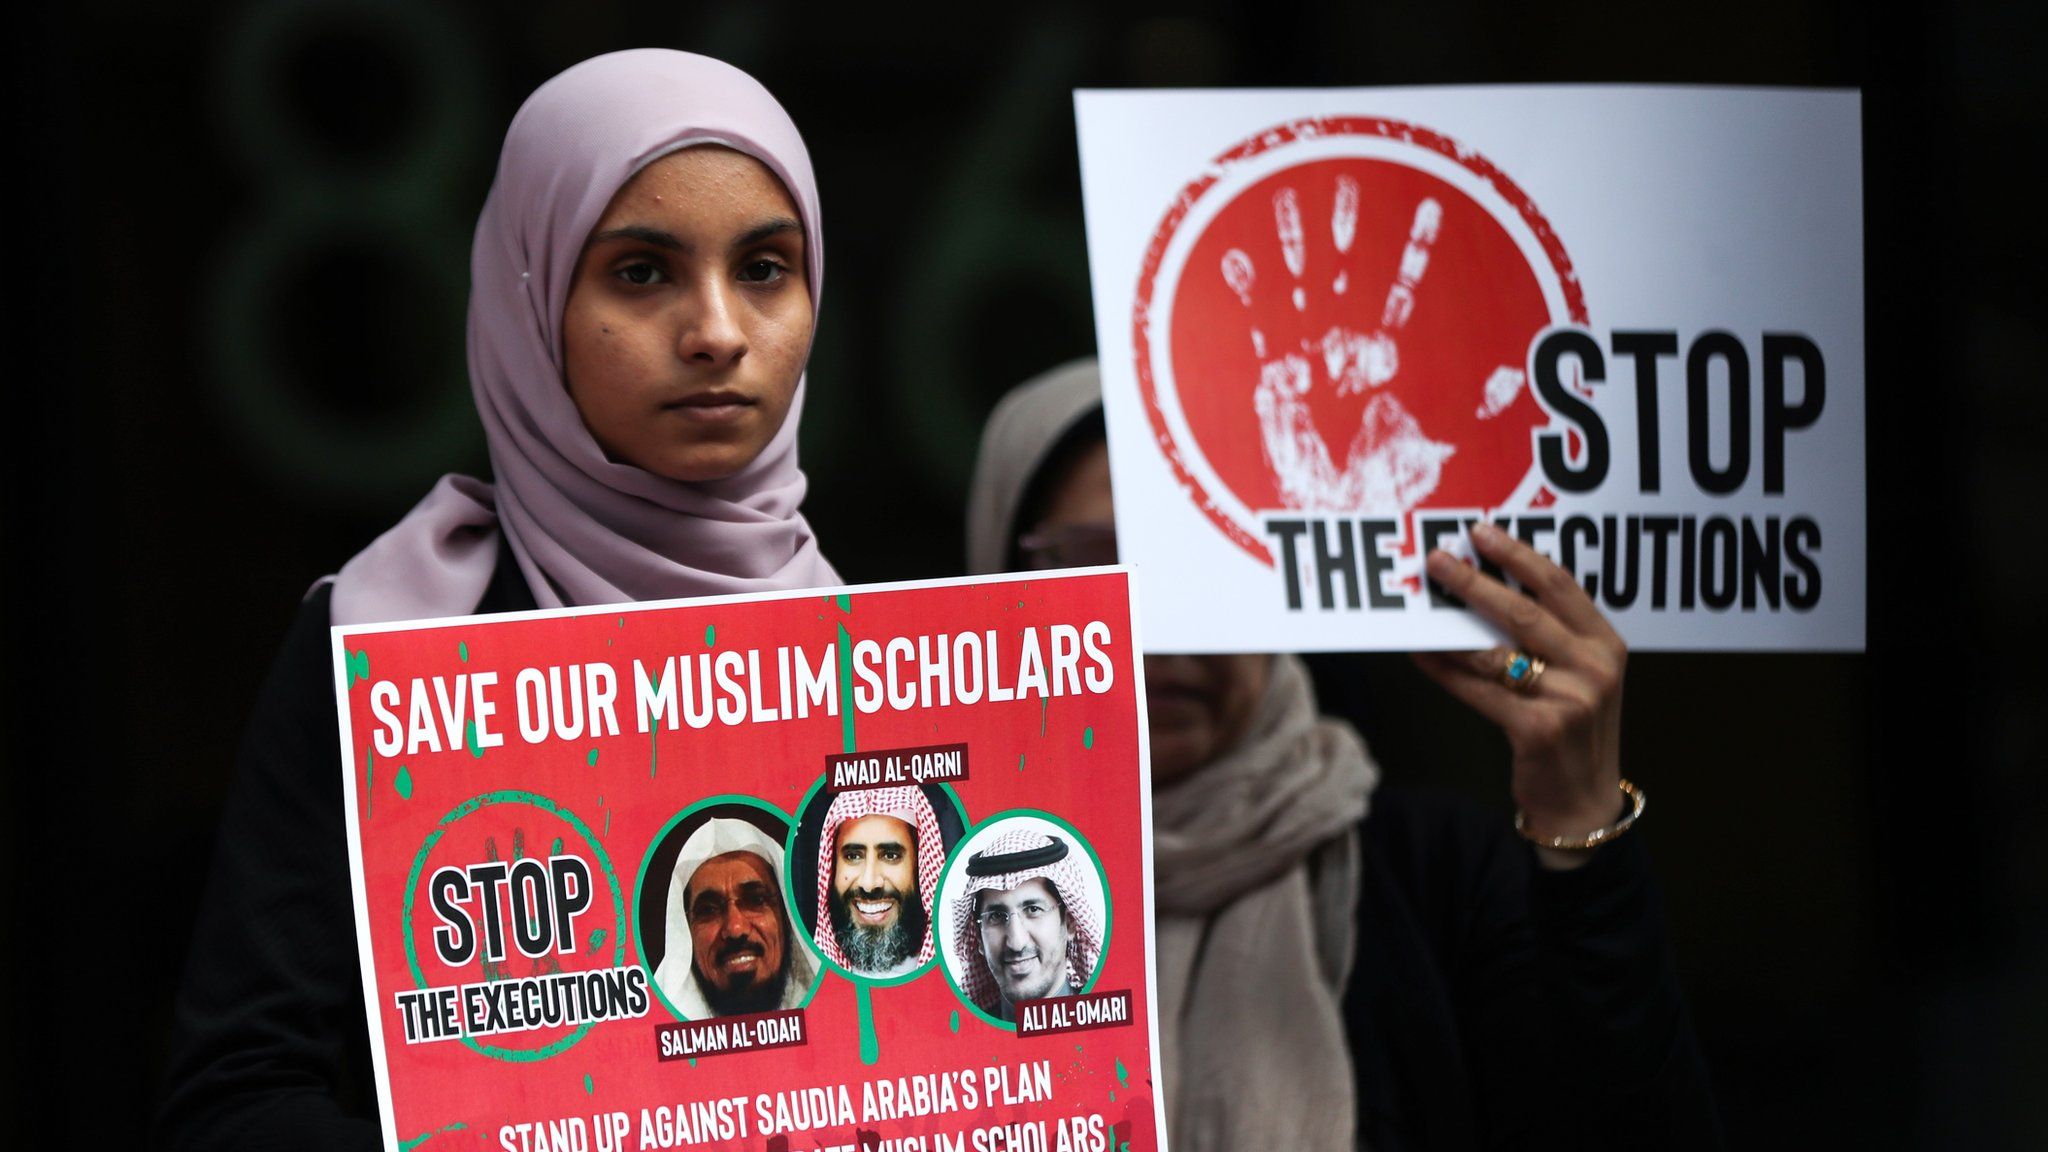 Women protest outside the Saudi consulate in New York on 1 June 2019 to protest against death sentences reportedly given to three Muslim clerics in Saudi Arabia